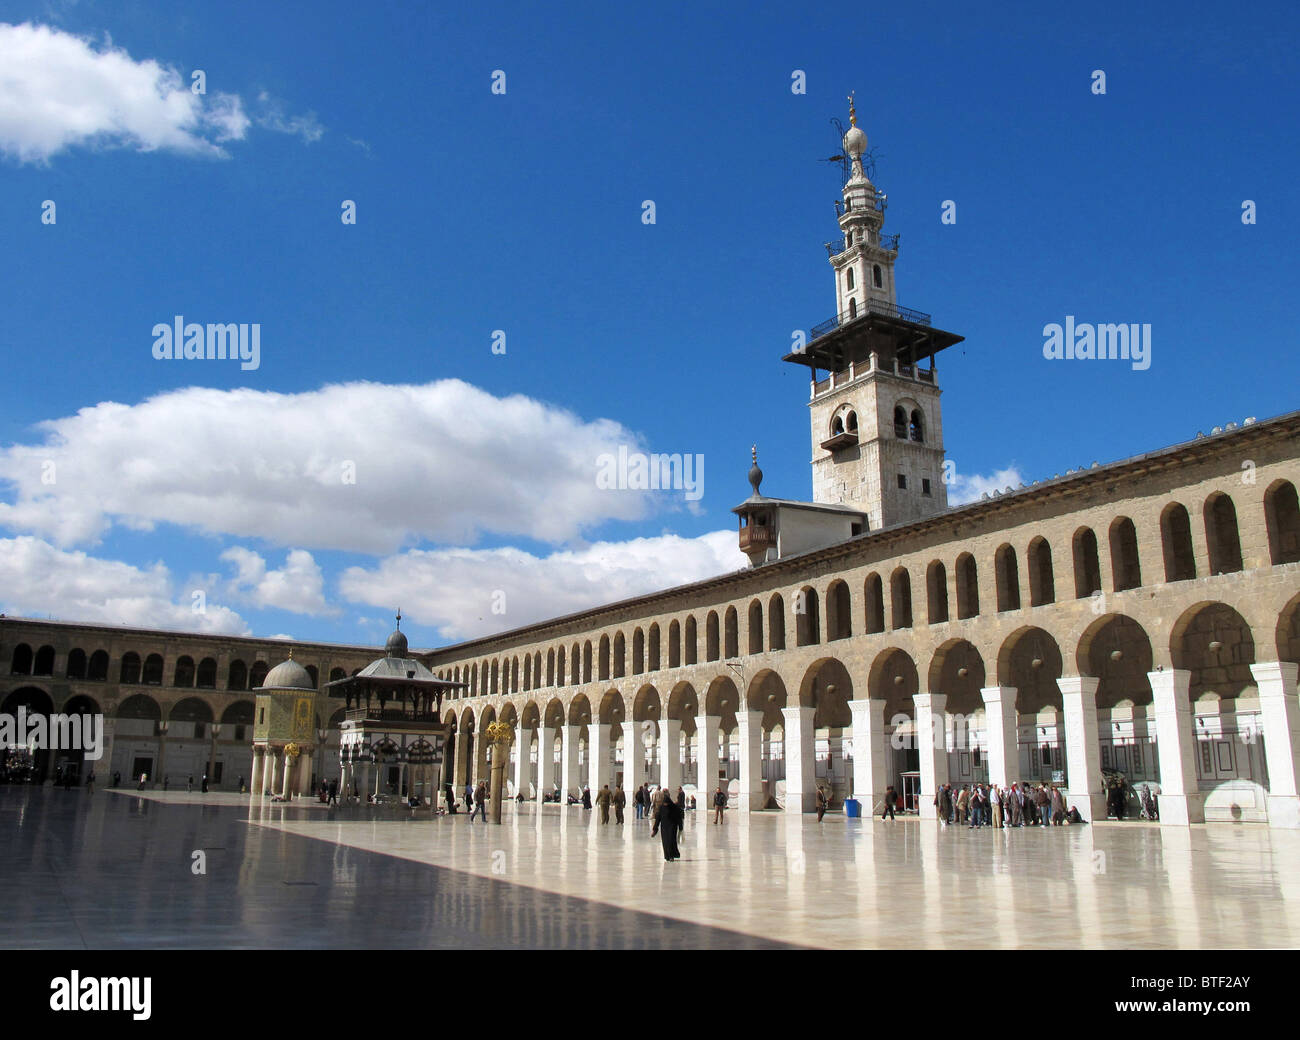 The courtyard of the Great Umayyad Mosque Damascus Syria Stock Photo